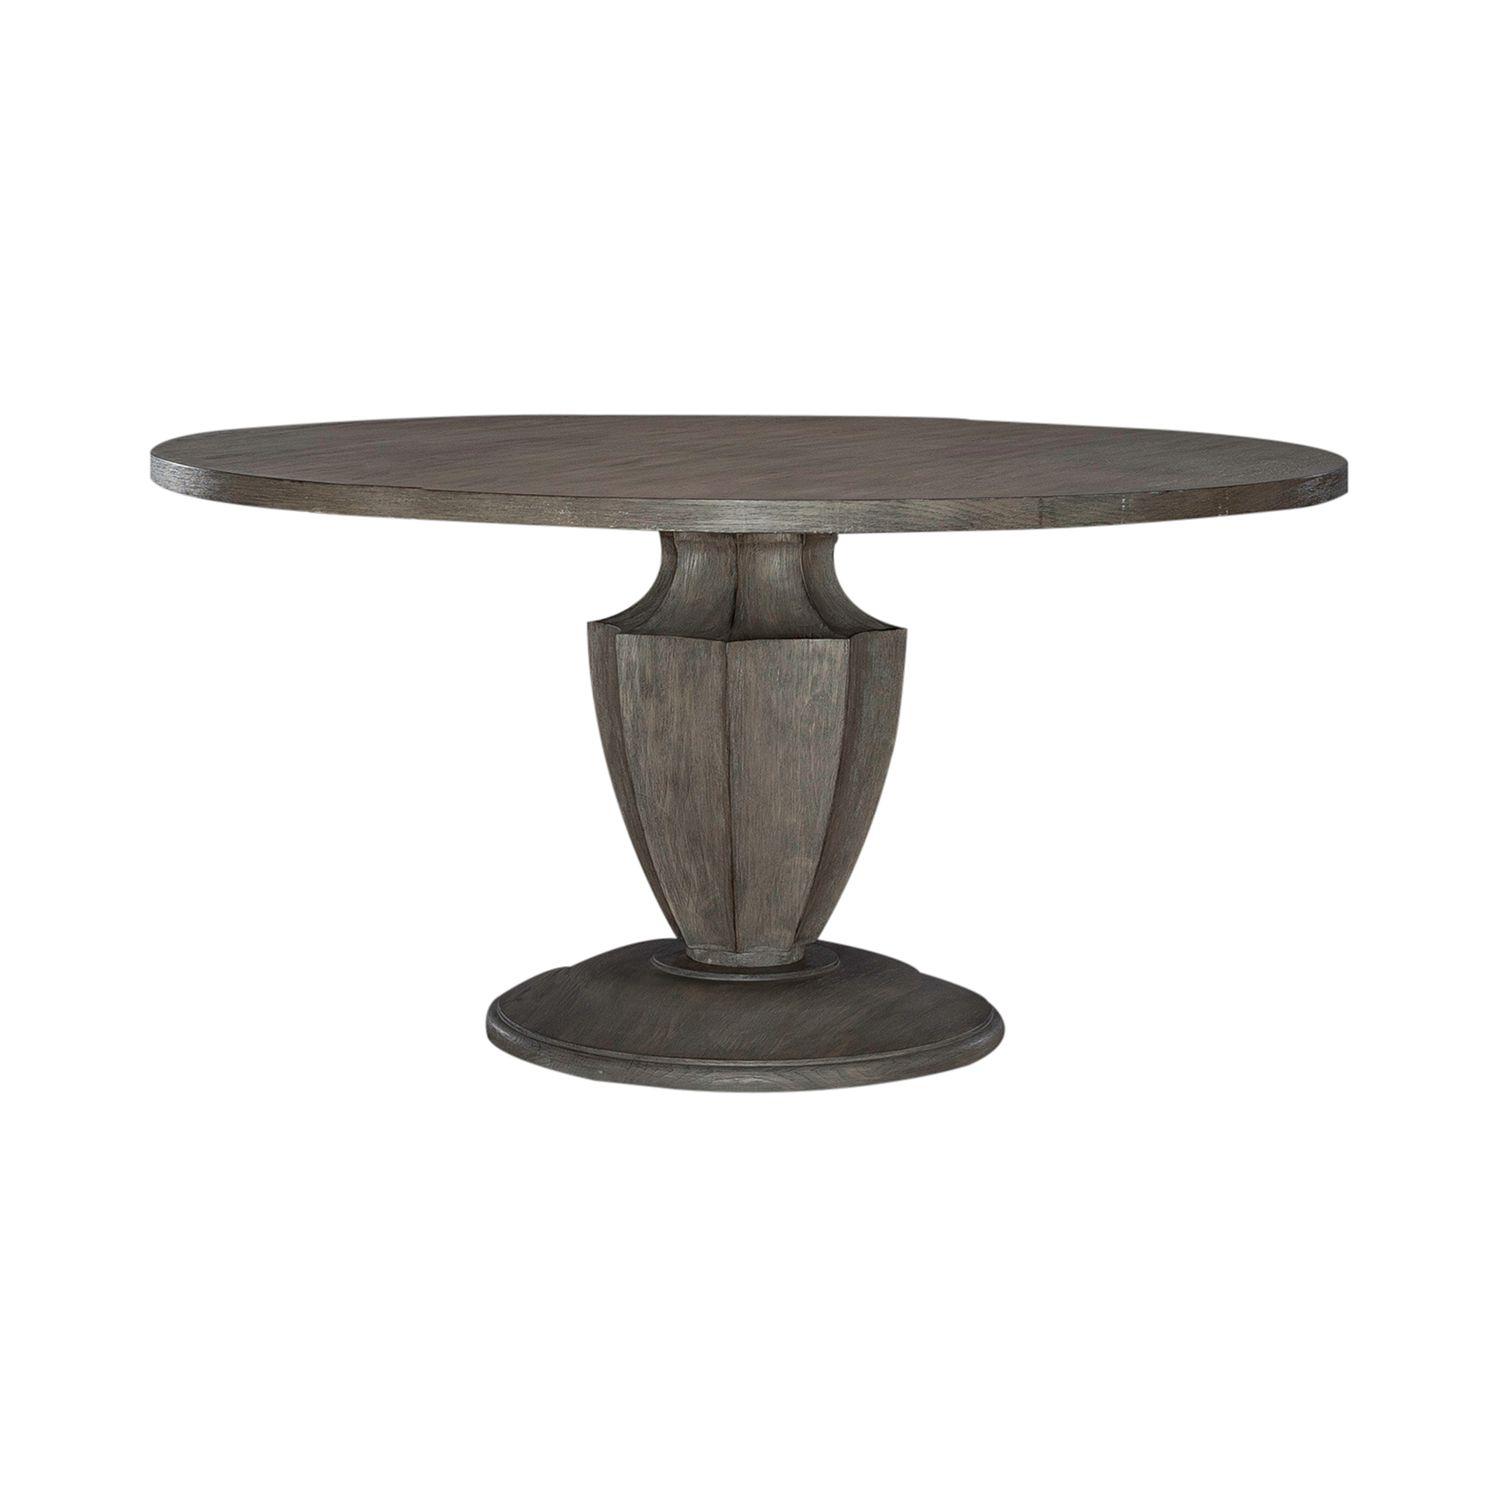 Modern Round table Westfield Round Dining Table 944-T6060-RT 944-T6060-RT in Havana, Brown 